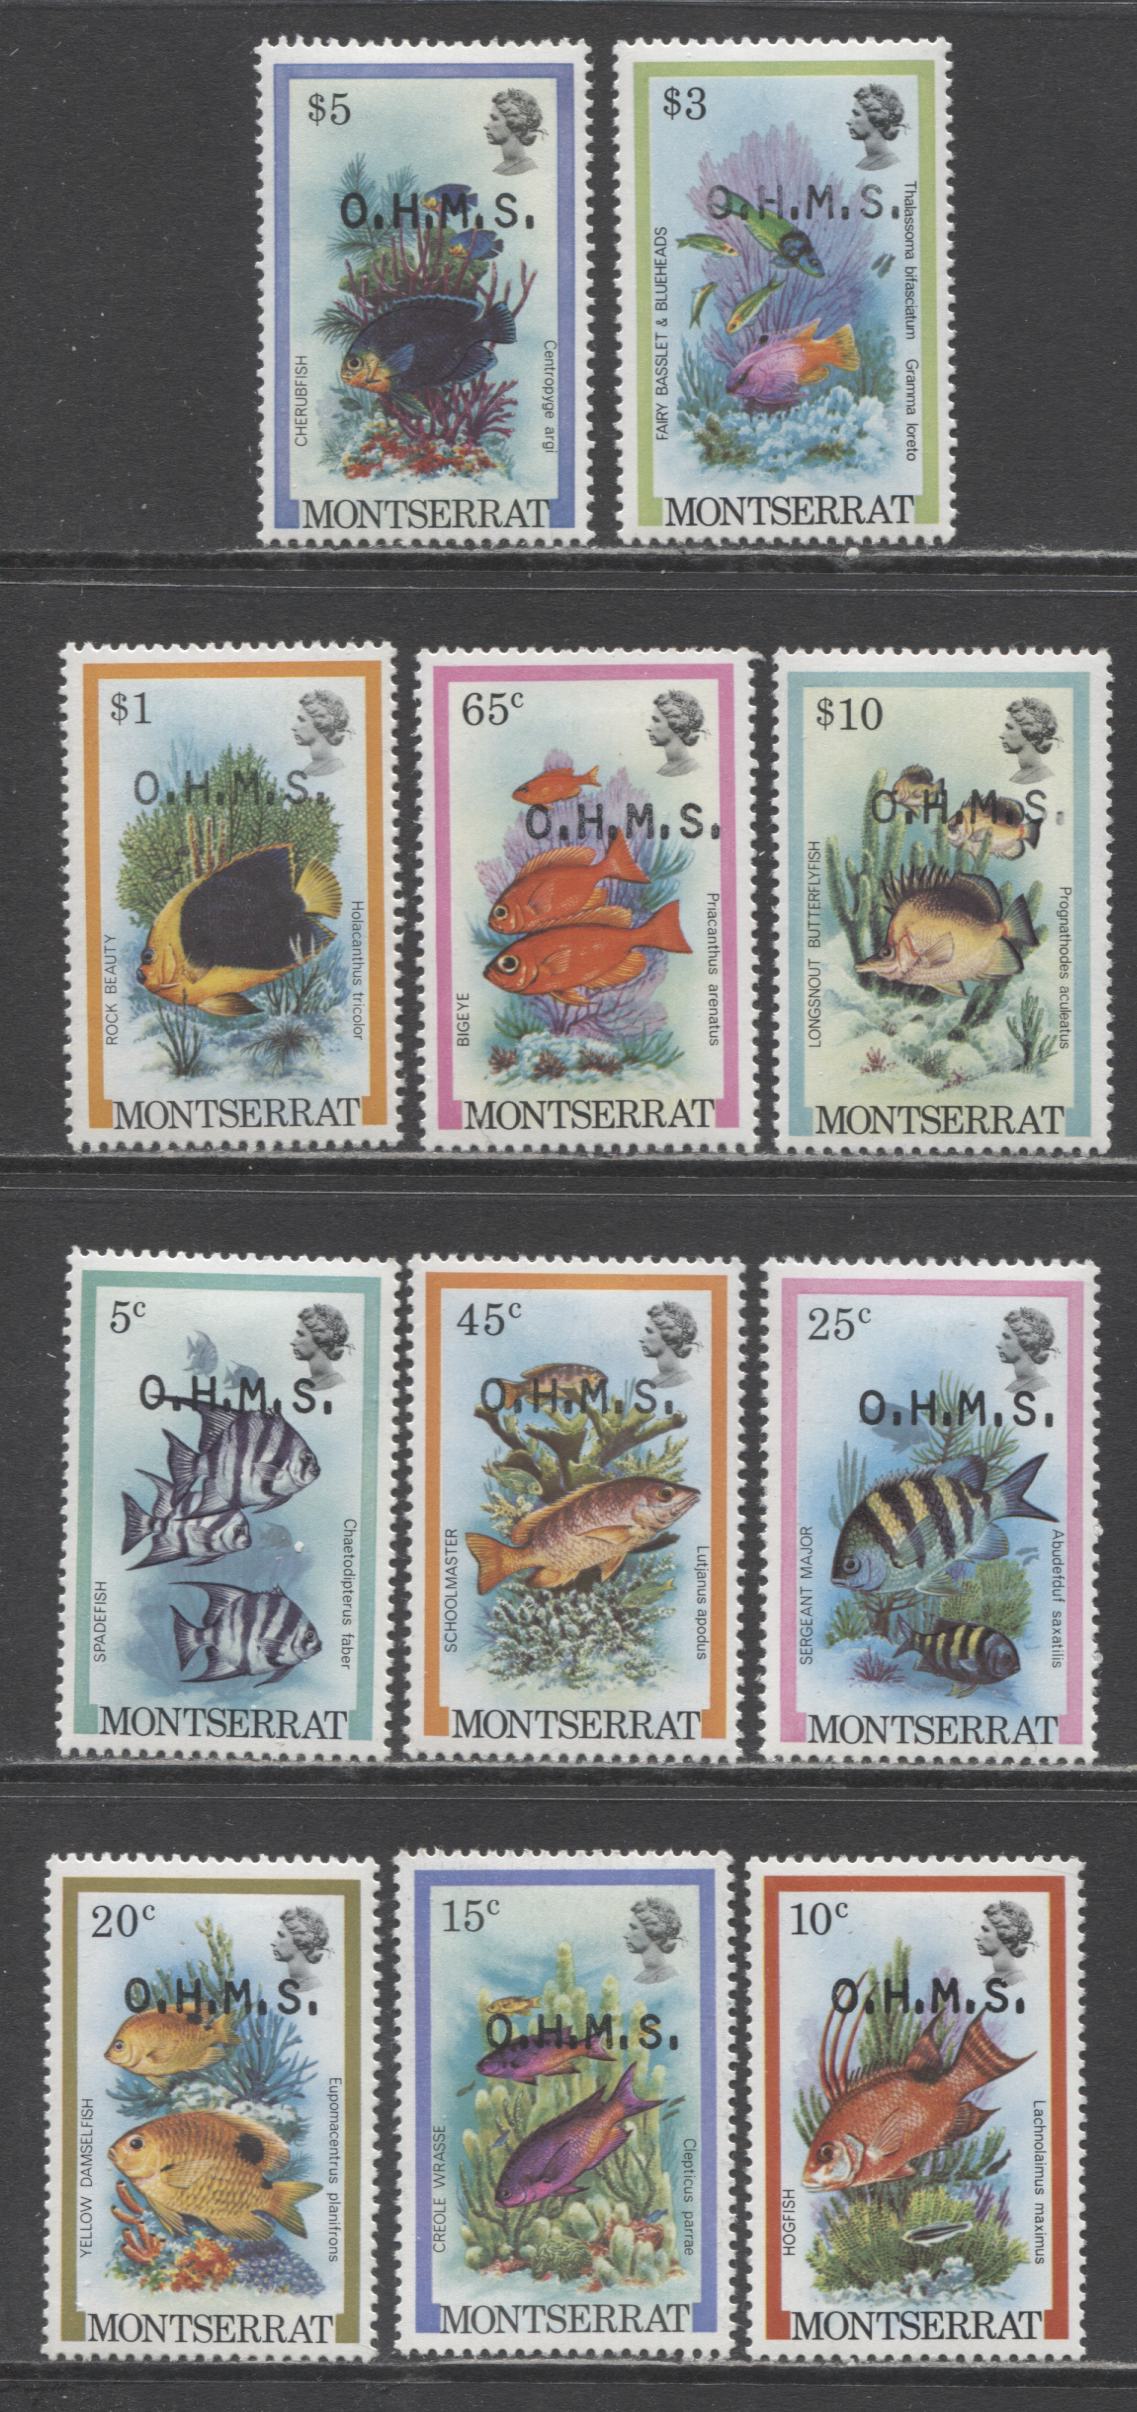 Lot 86 Montserrat SC#O45-O55 1981 Overprinted Fish Issue, 11 VFOG Singles, Click on Listing to See ALL Pictures, 2017 Scott Cat. $16.35